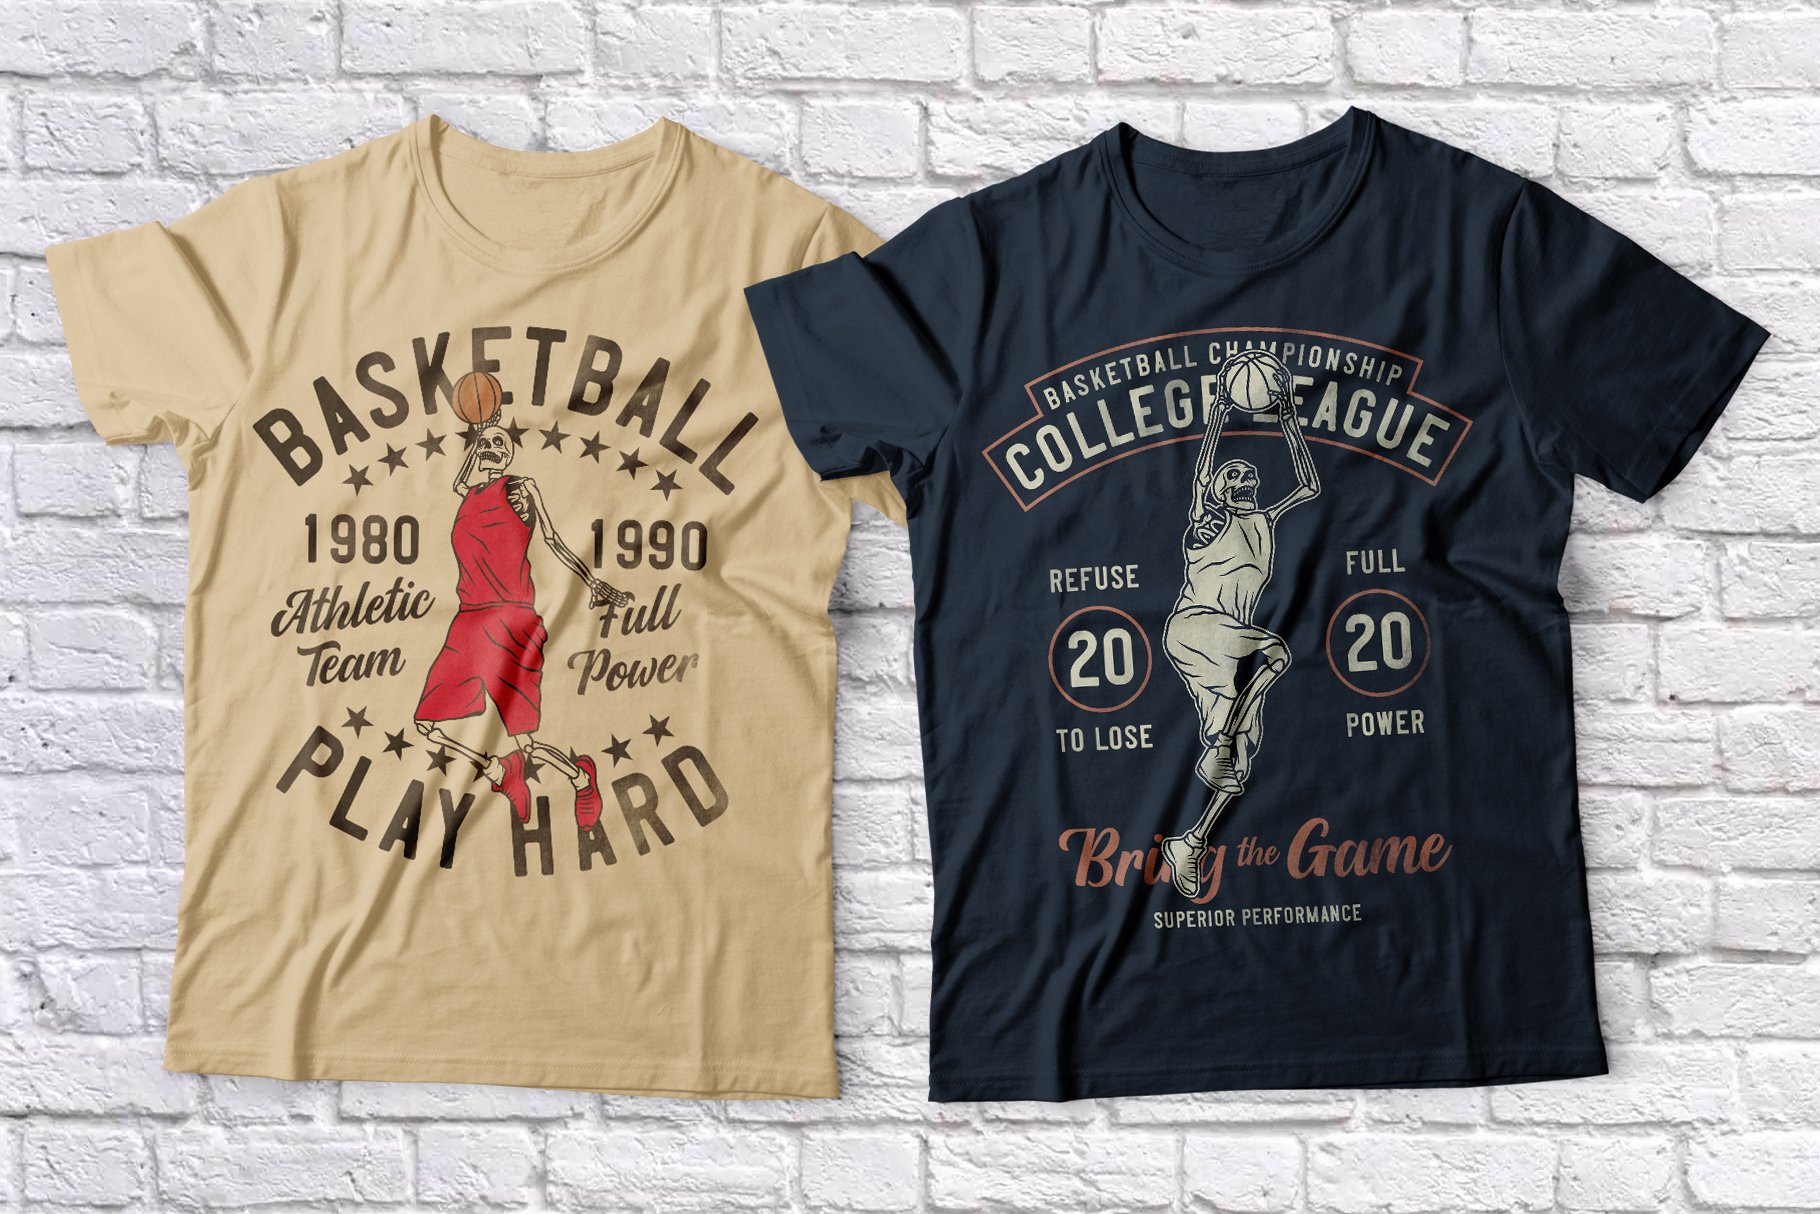 Two t-shirts in different colors with an vintage illustration.